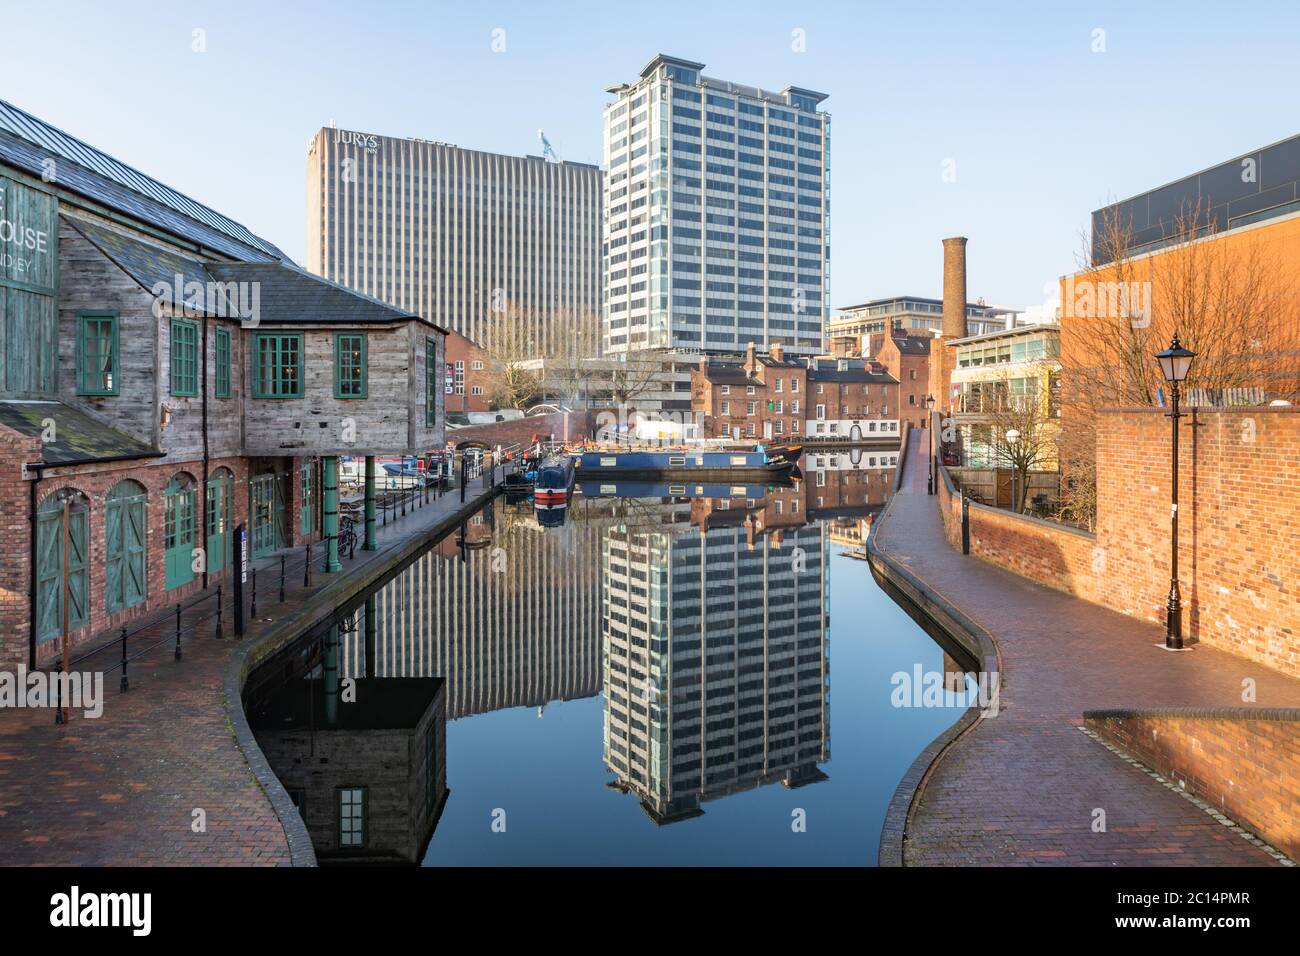 Birmingham, UK - 24/02/19: Gas Street canal basin with moored narrowboats. Old canal buildings and modern tower blocks are reflected in the water. Stock Photo